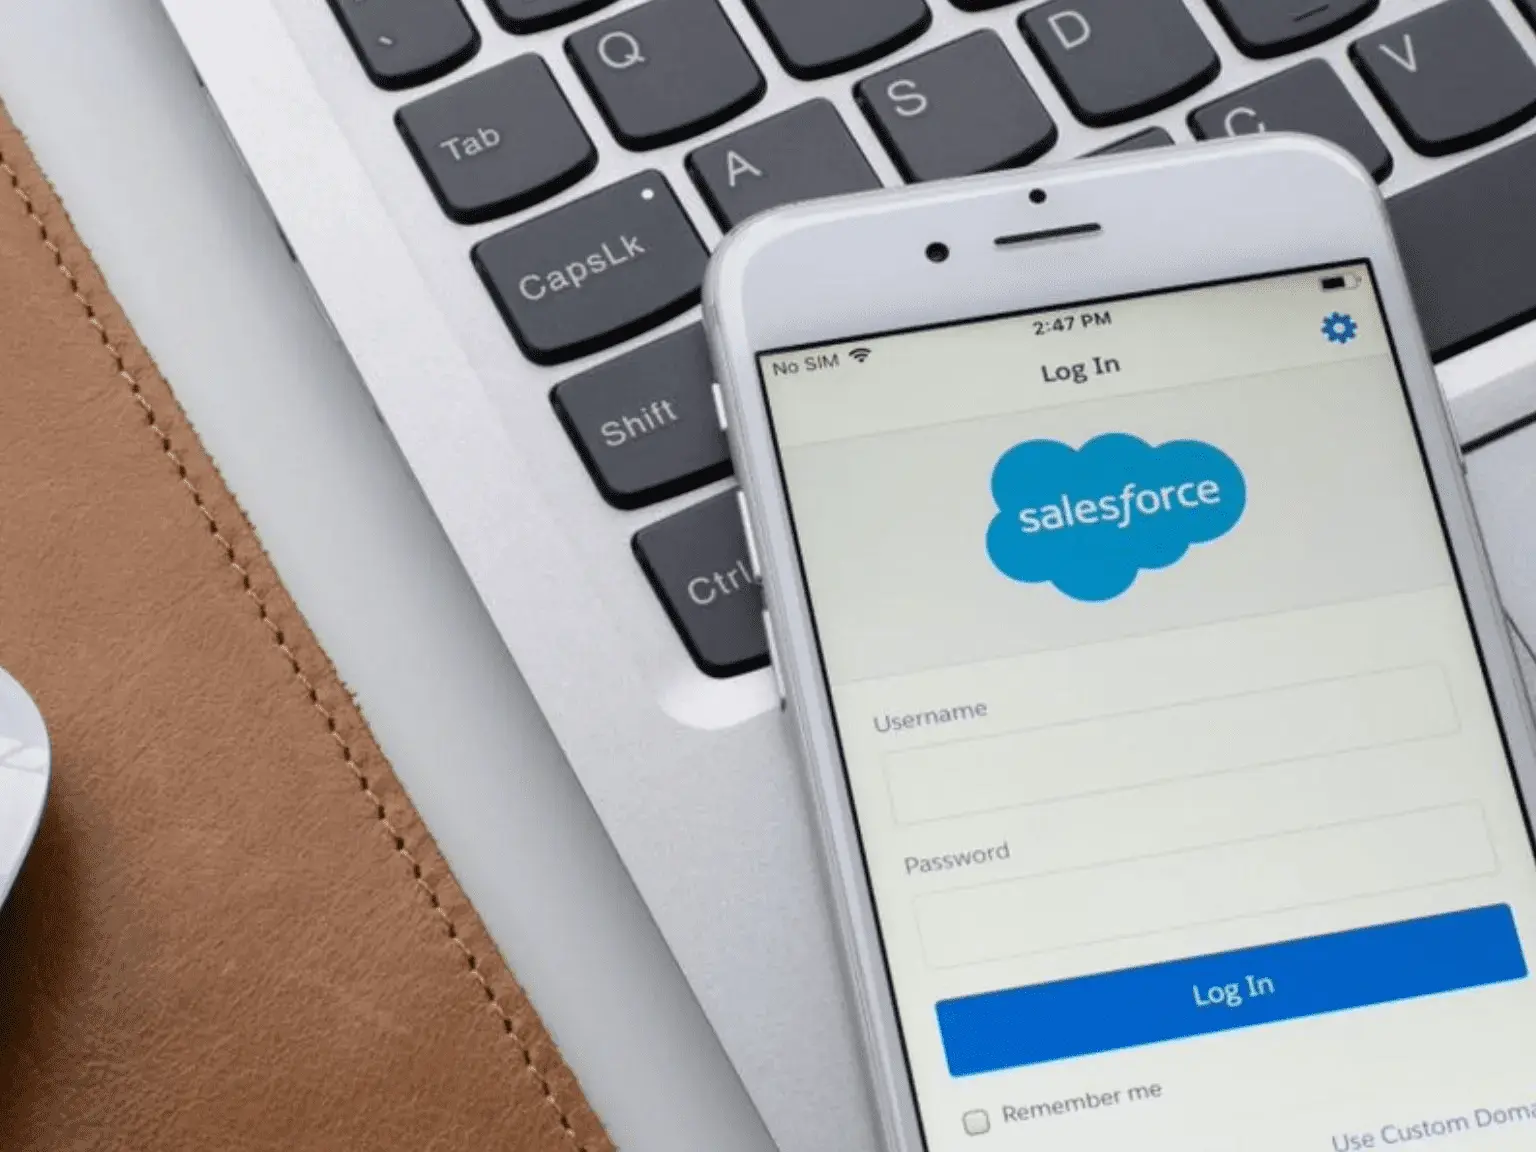 Portland, OR, USA - Feb 11, 2021: The Salesforce app login page is seen on an iPhone. Salesforce.com, Inc. is an American cloud-based software company that primarily provides CRM service